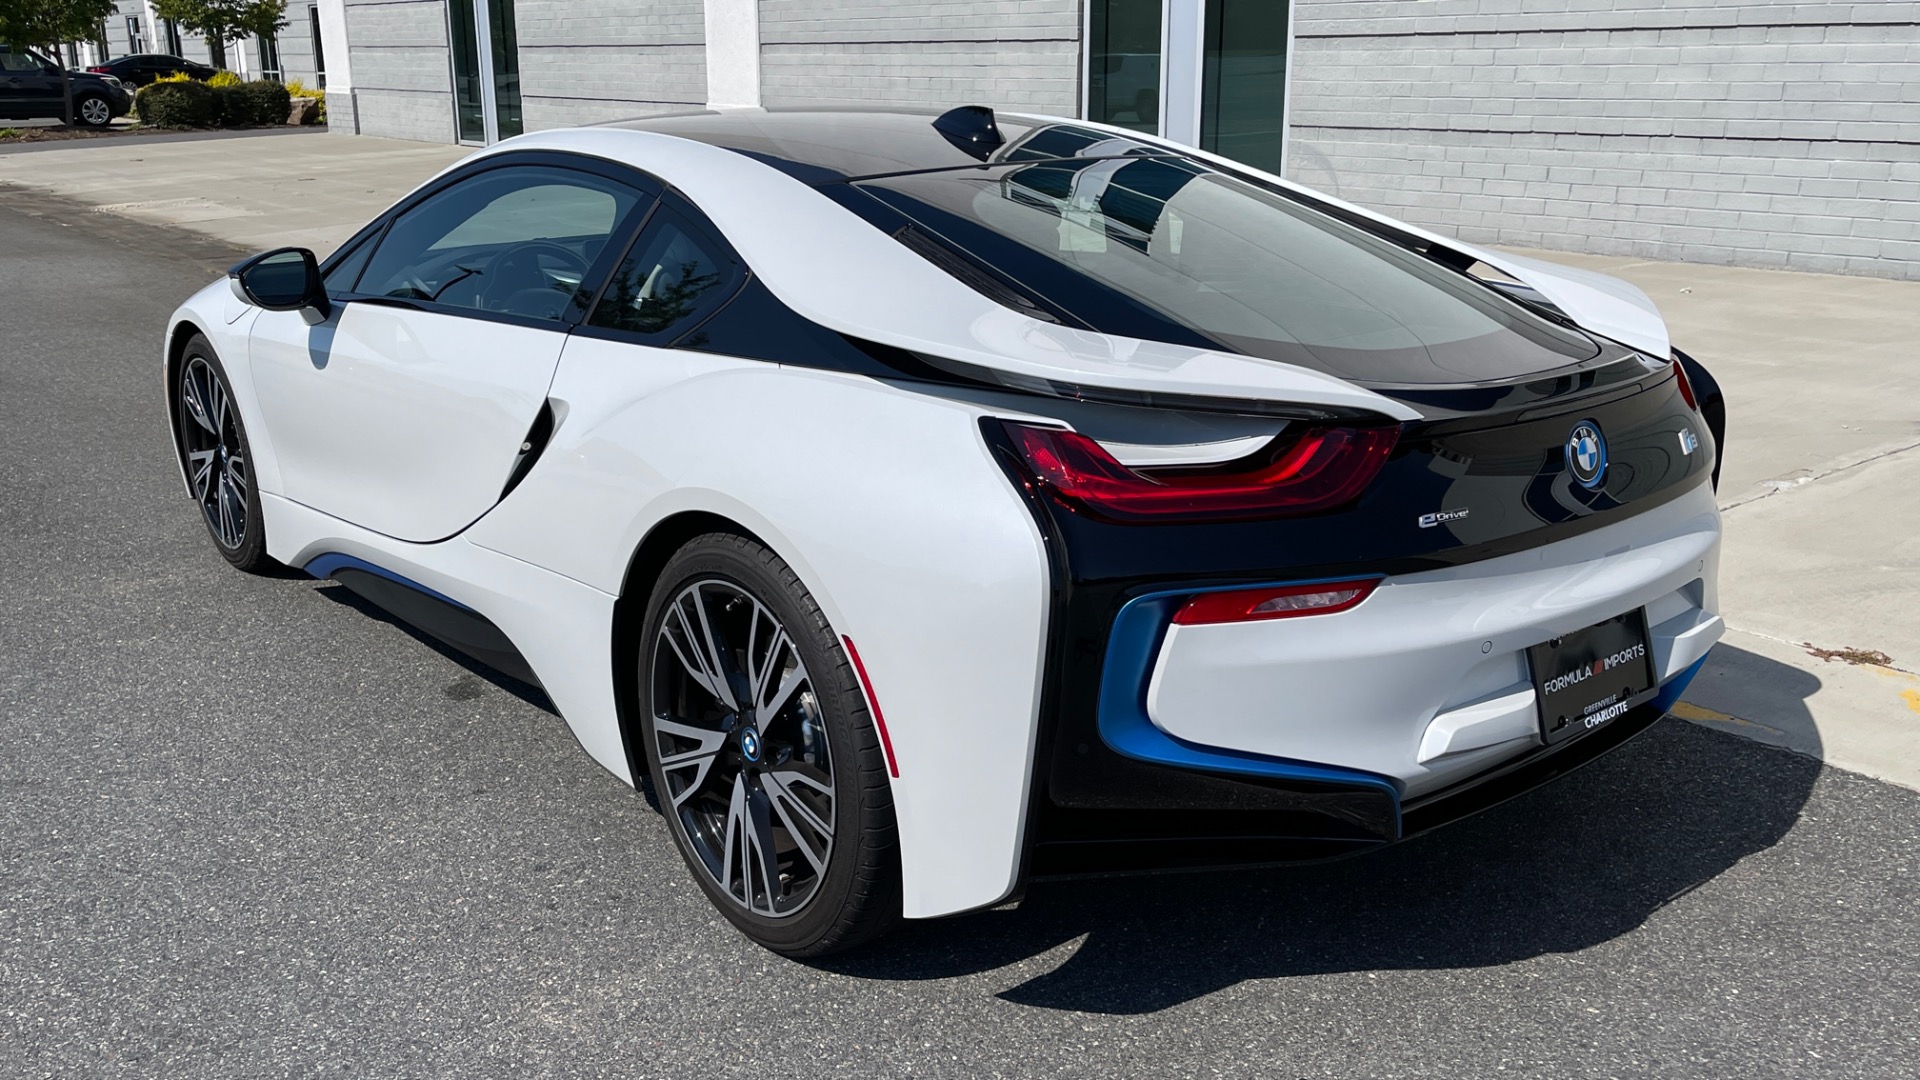 Used 2014 BMW i8 PURE IMPULSE WORLD / BLUE SEATBELTS / PERFORATED LEATHER / LED HEADLIGHTS for sale $75,999 at Formula Imports in Charlotte NC 28227 5